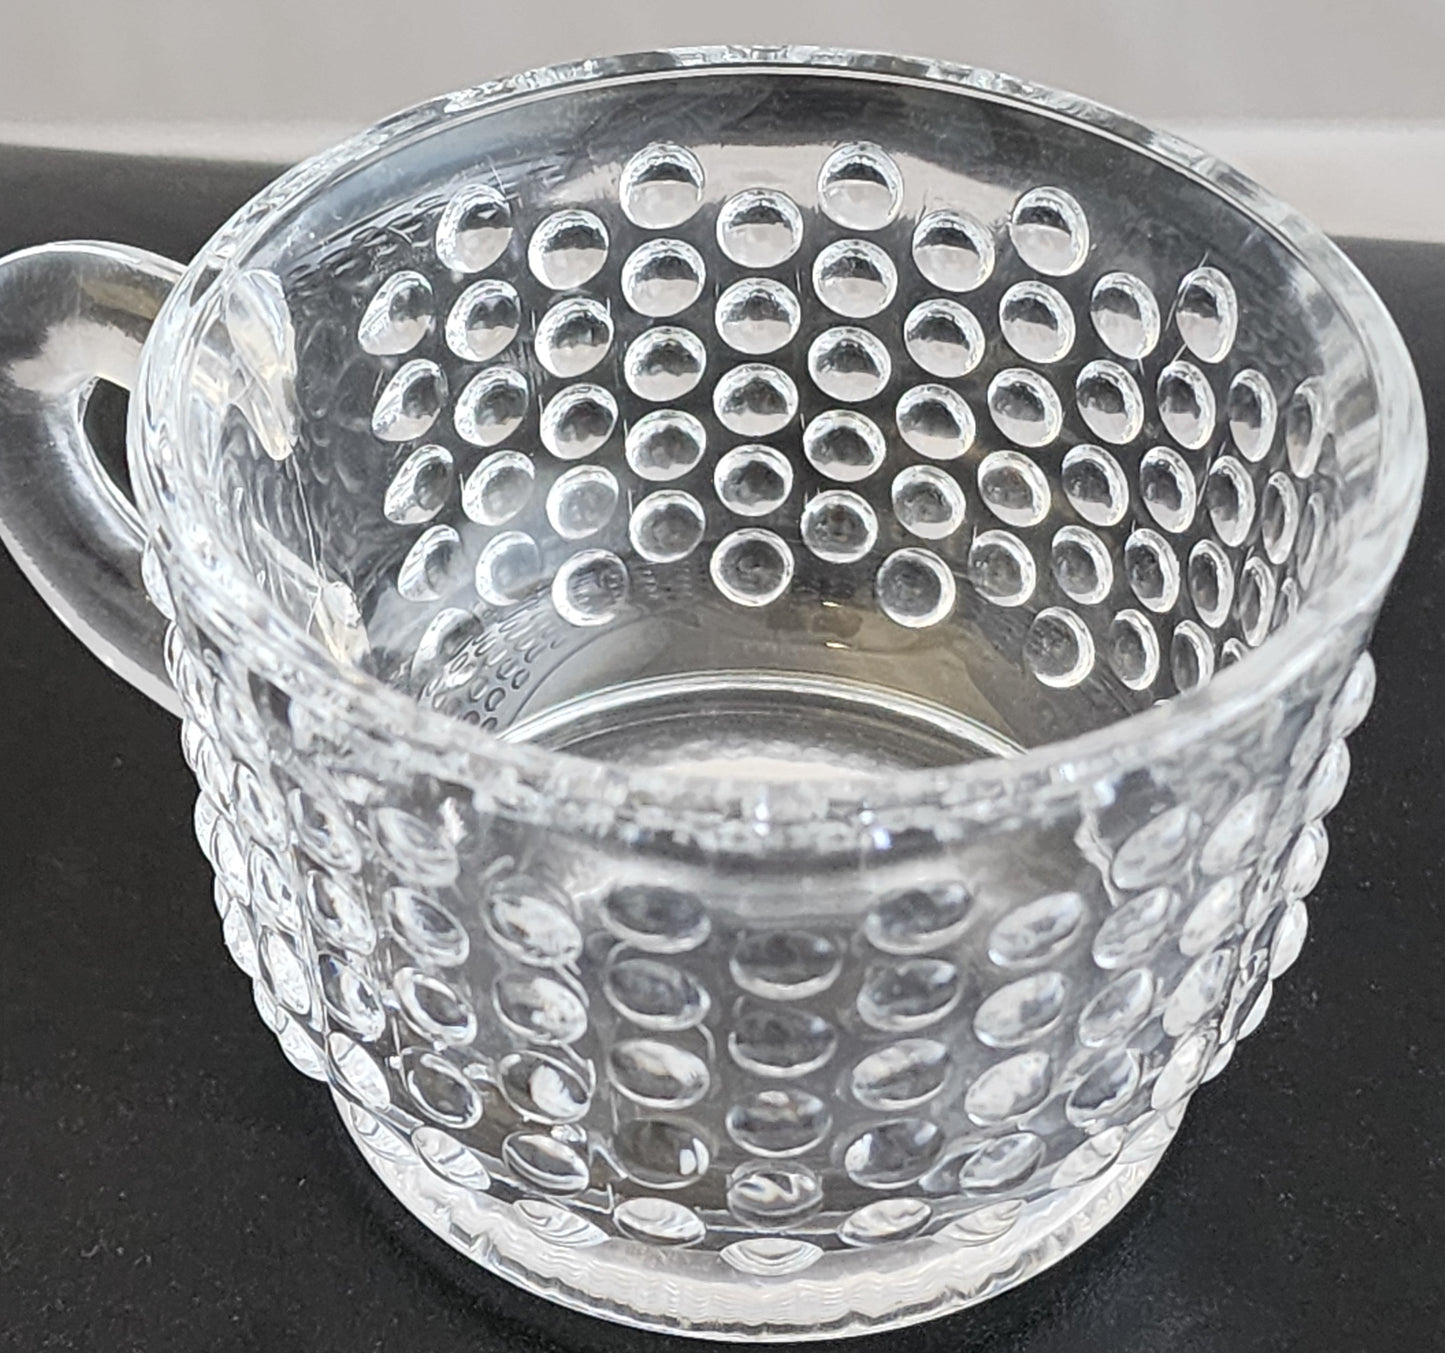 L E Smith Glass hobnail punch cup set of 6 pieces